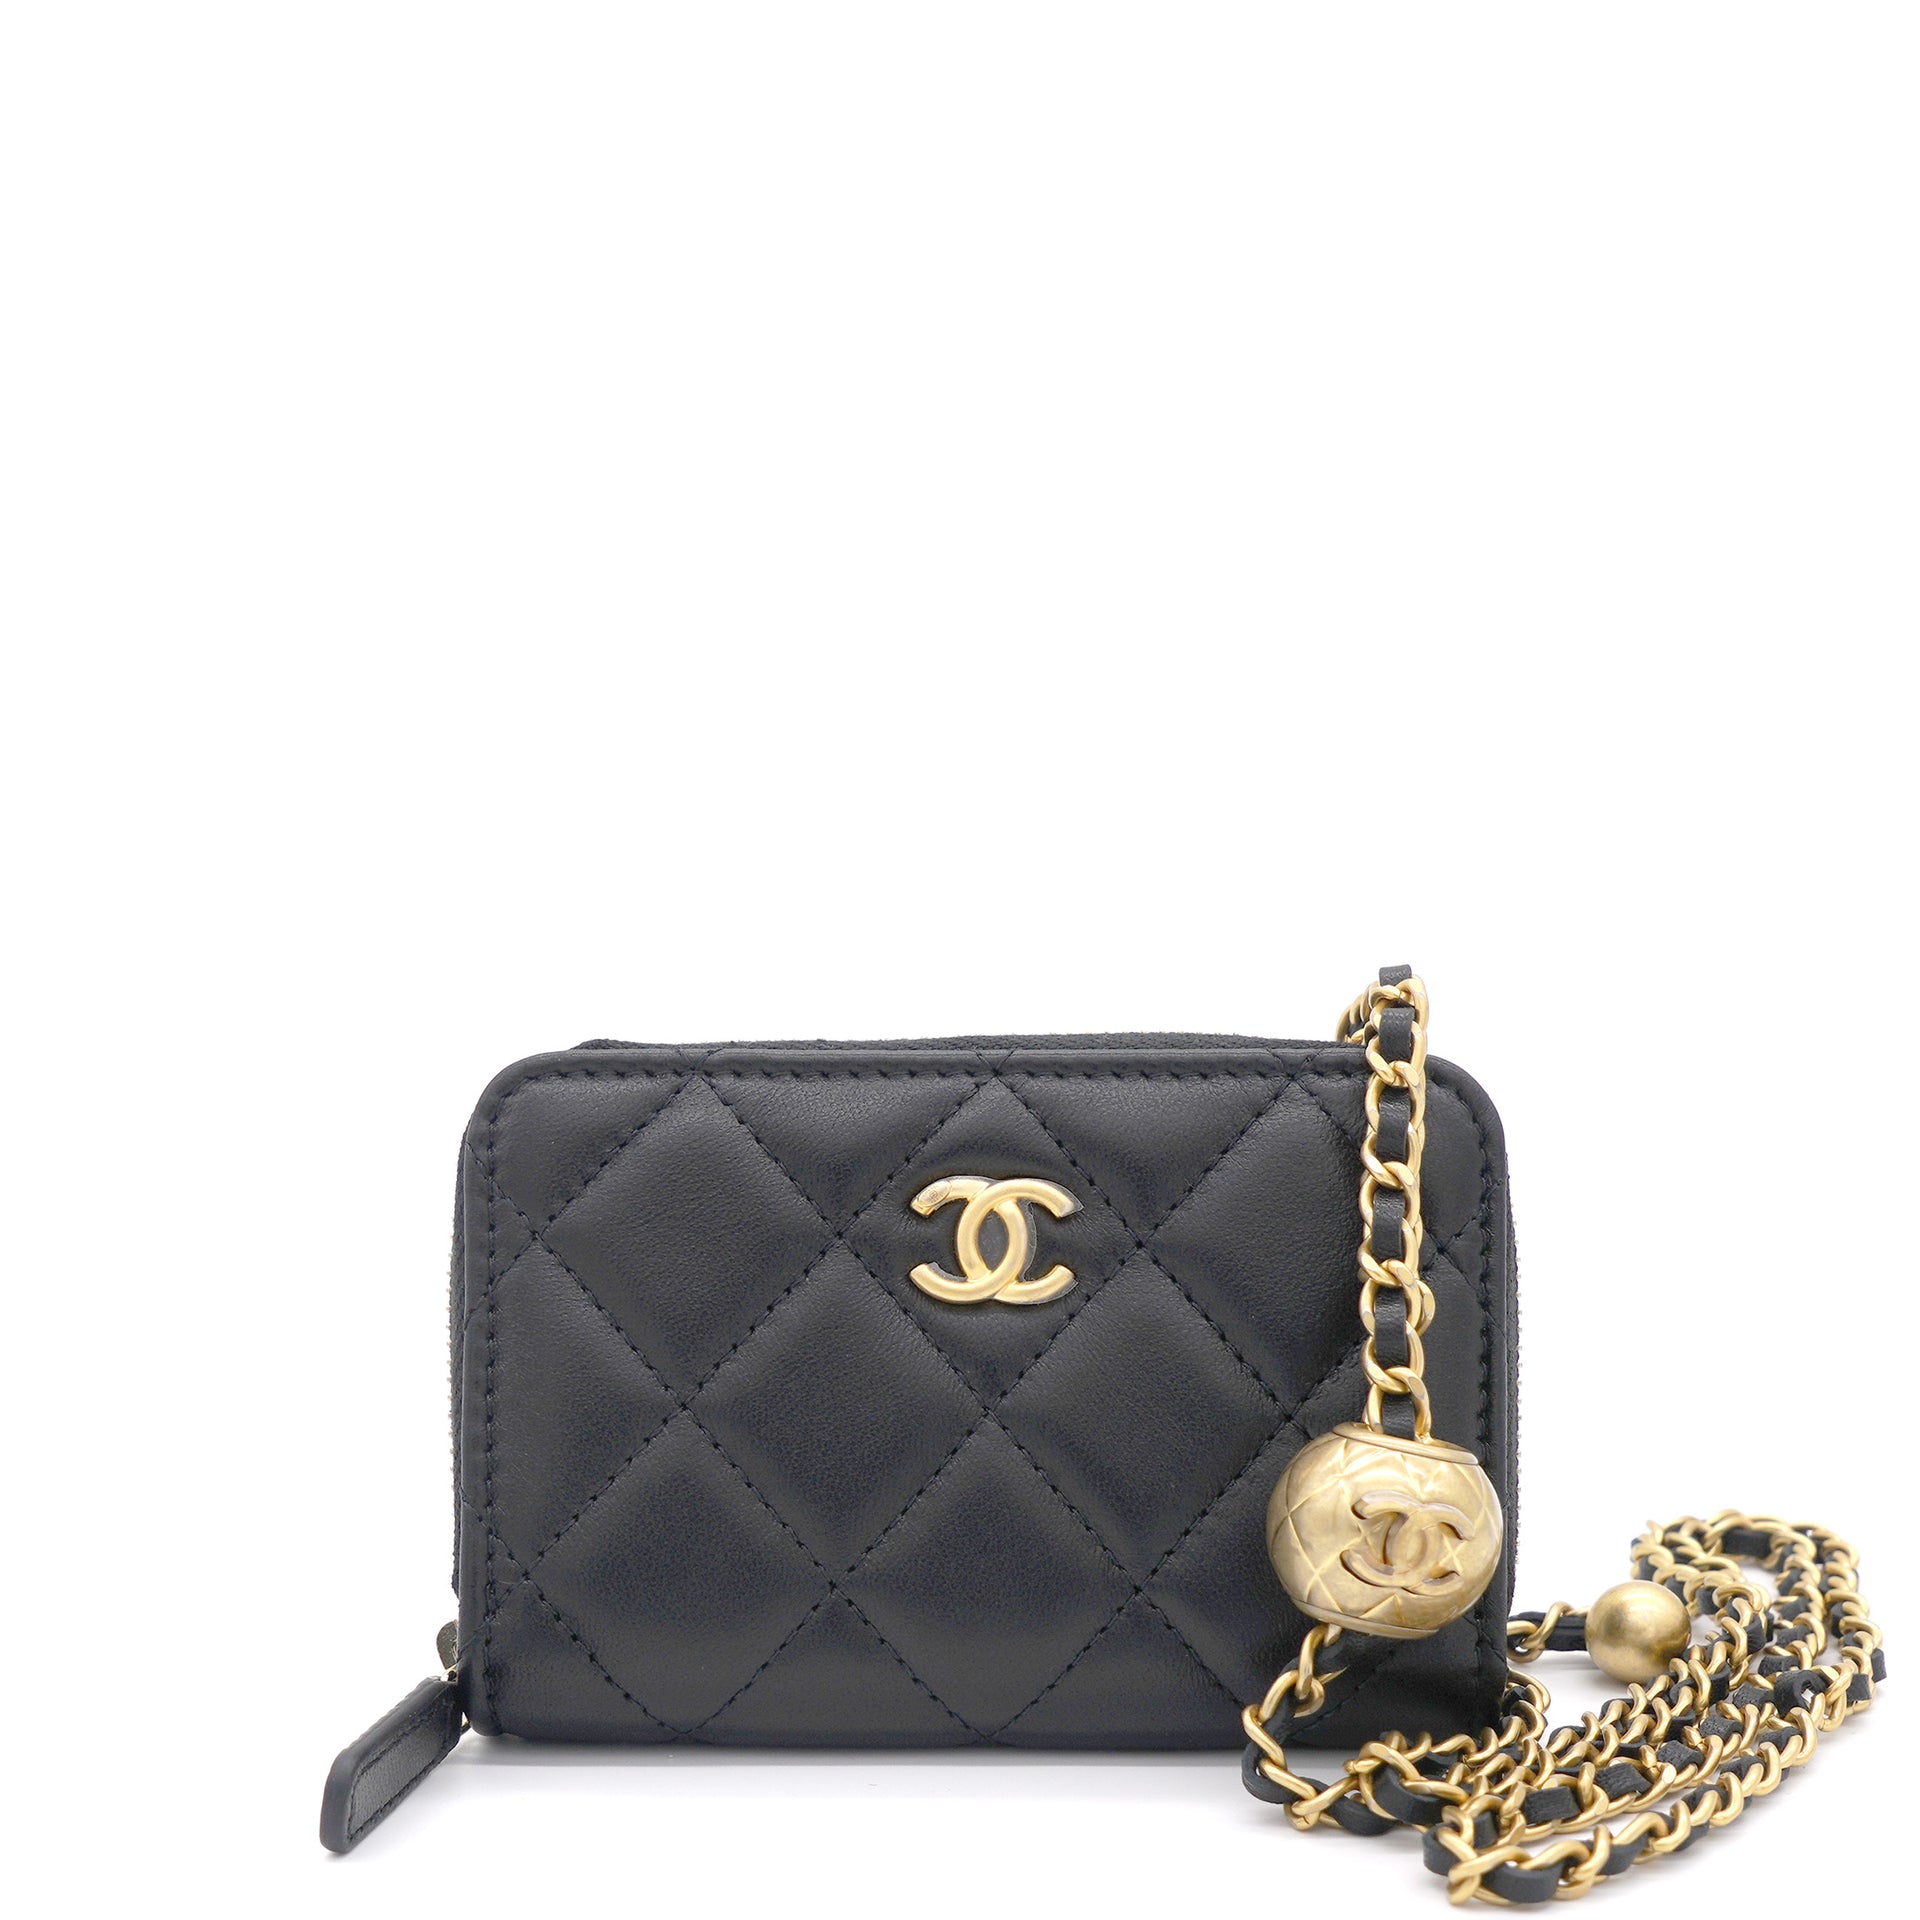 My Chanel Handbag Collection Where  Why I Bought Each Chanel Purse   Fashion Jackson